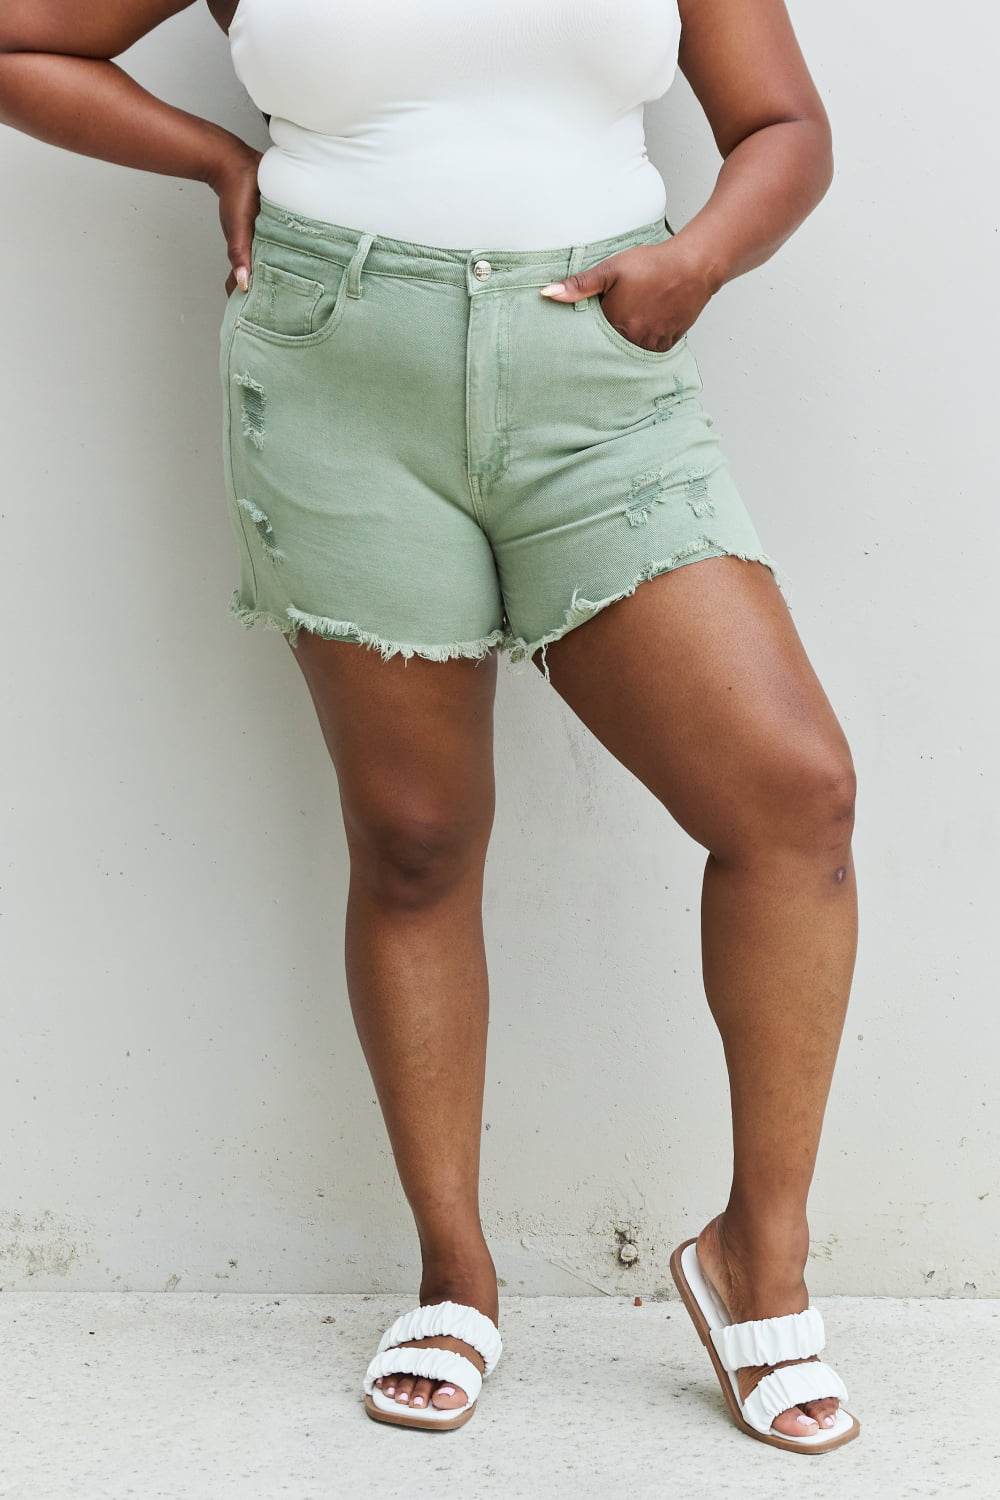 RISEN Katie Full Size High Waisted Distressed Shorts in Gum Leaf